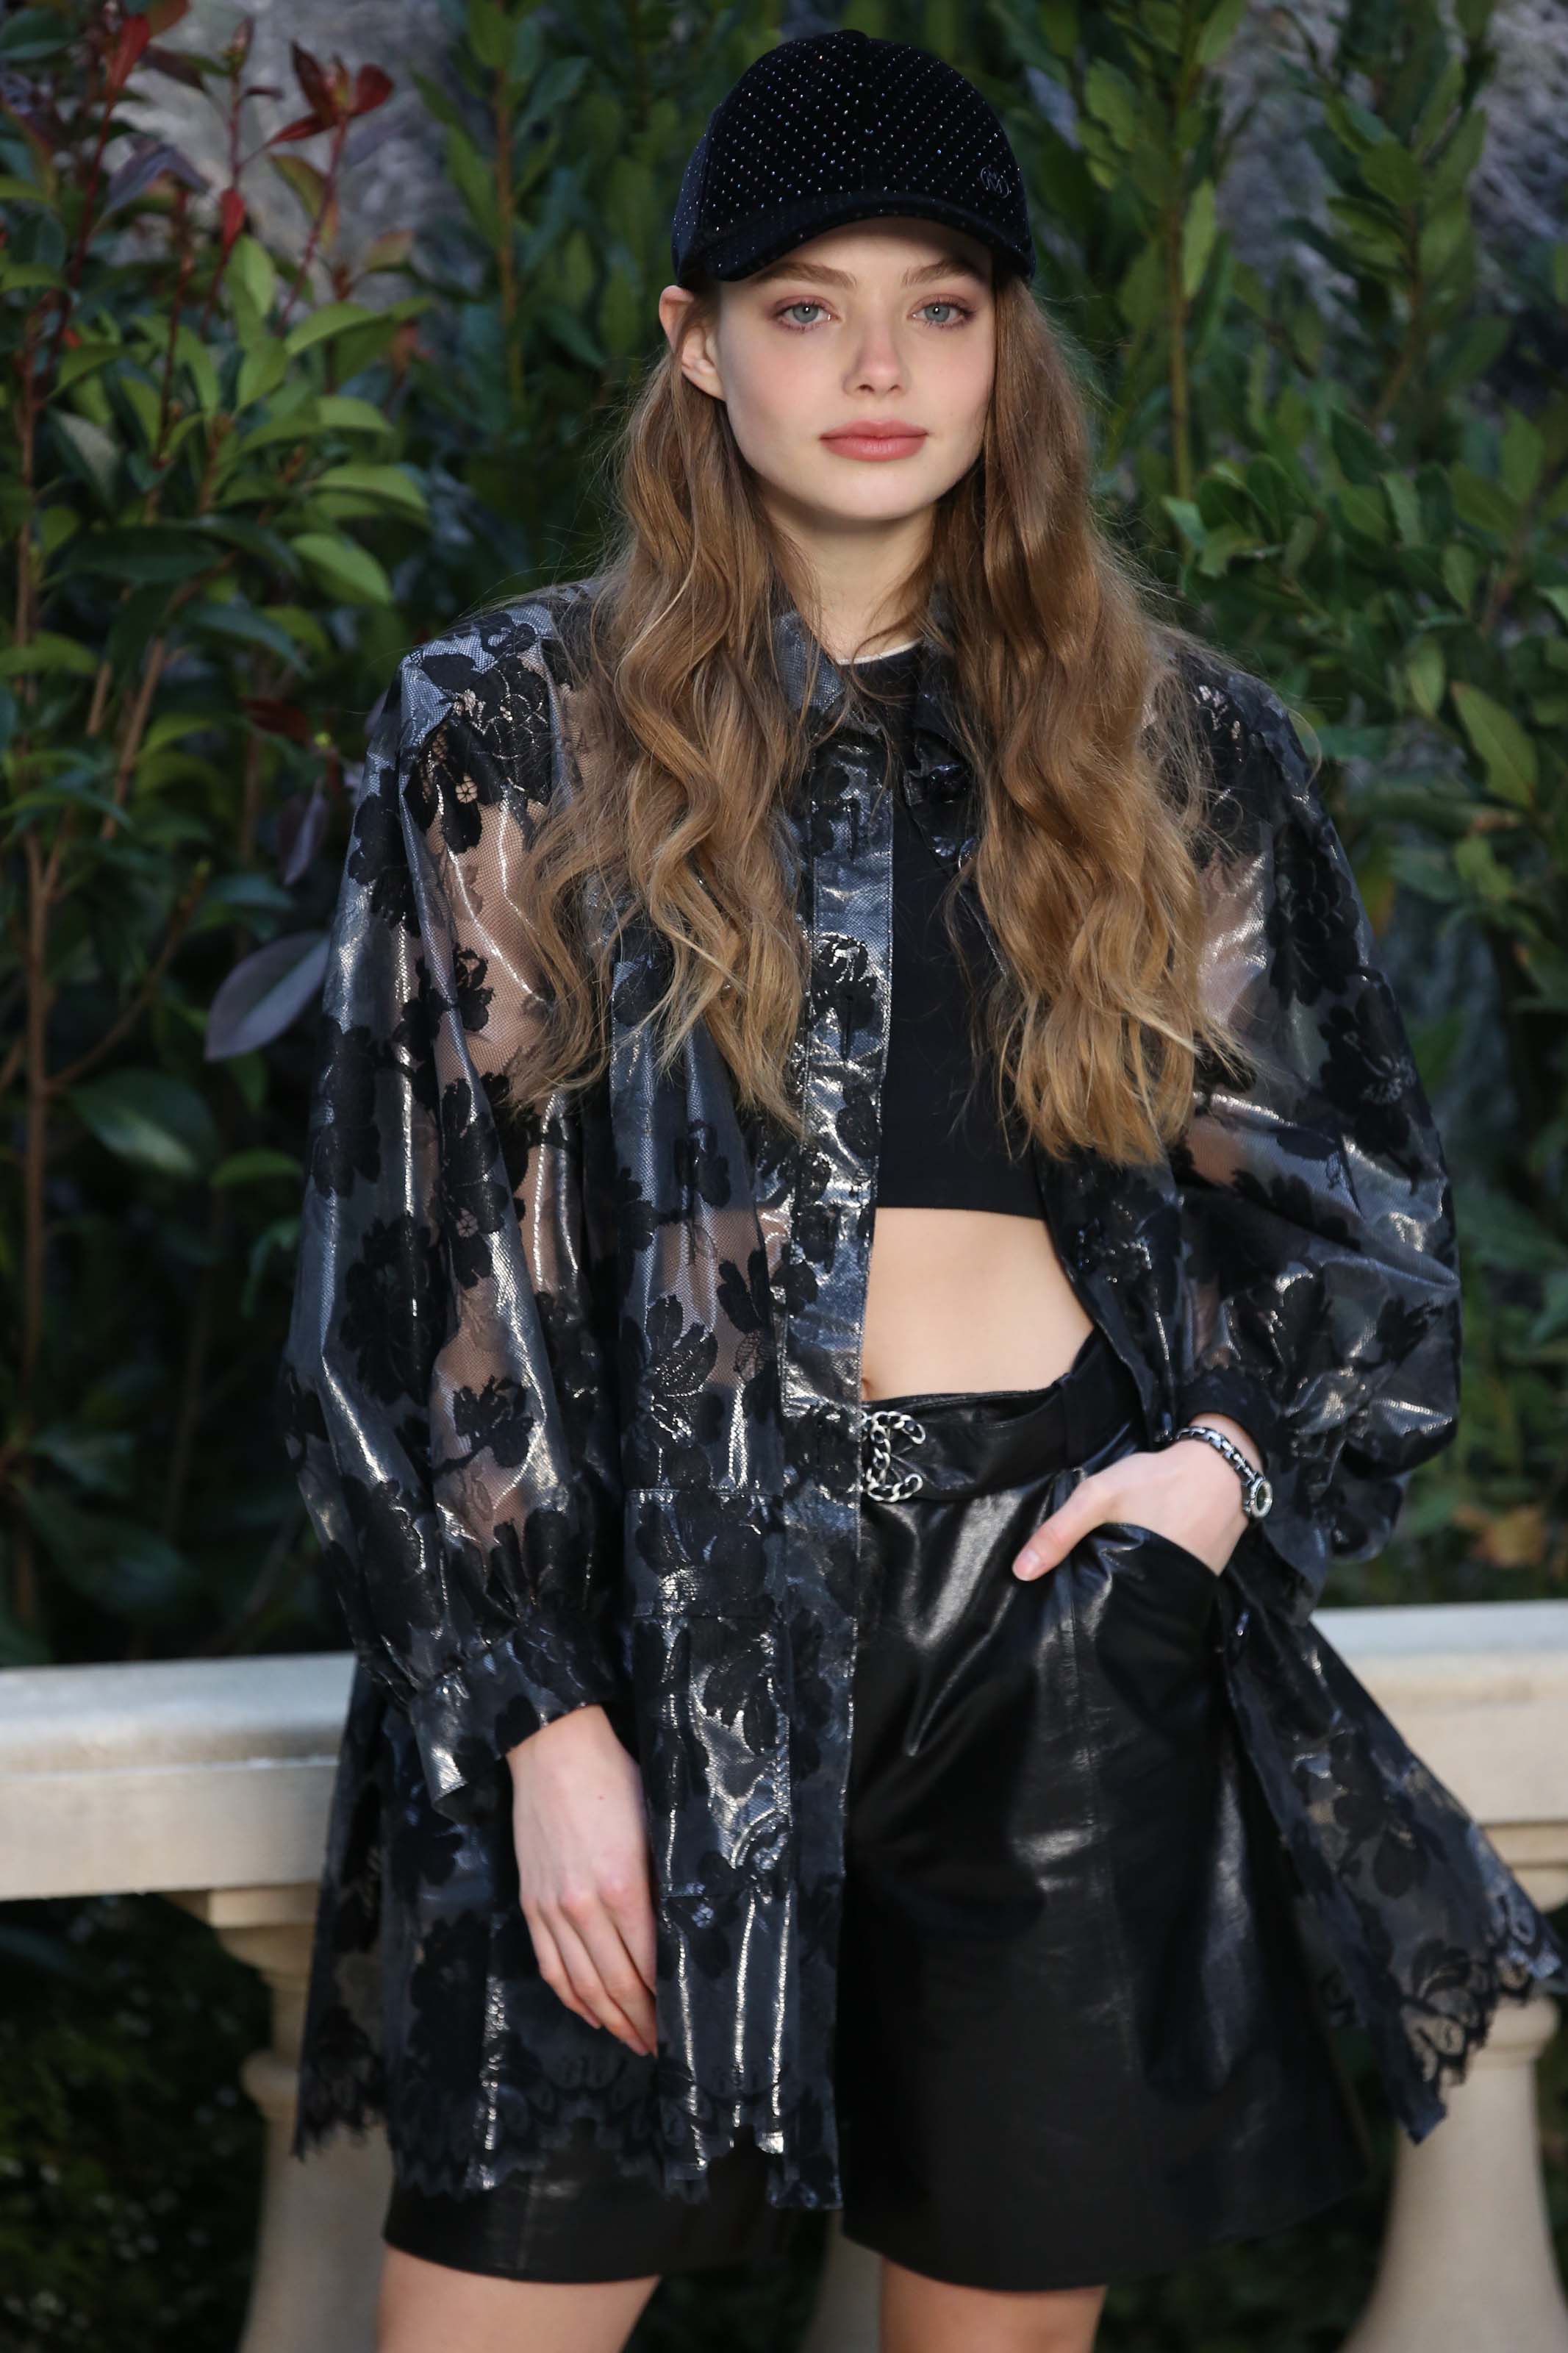 Kristine Froseth attends Chanel show